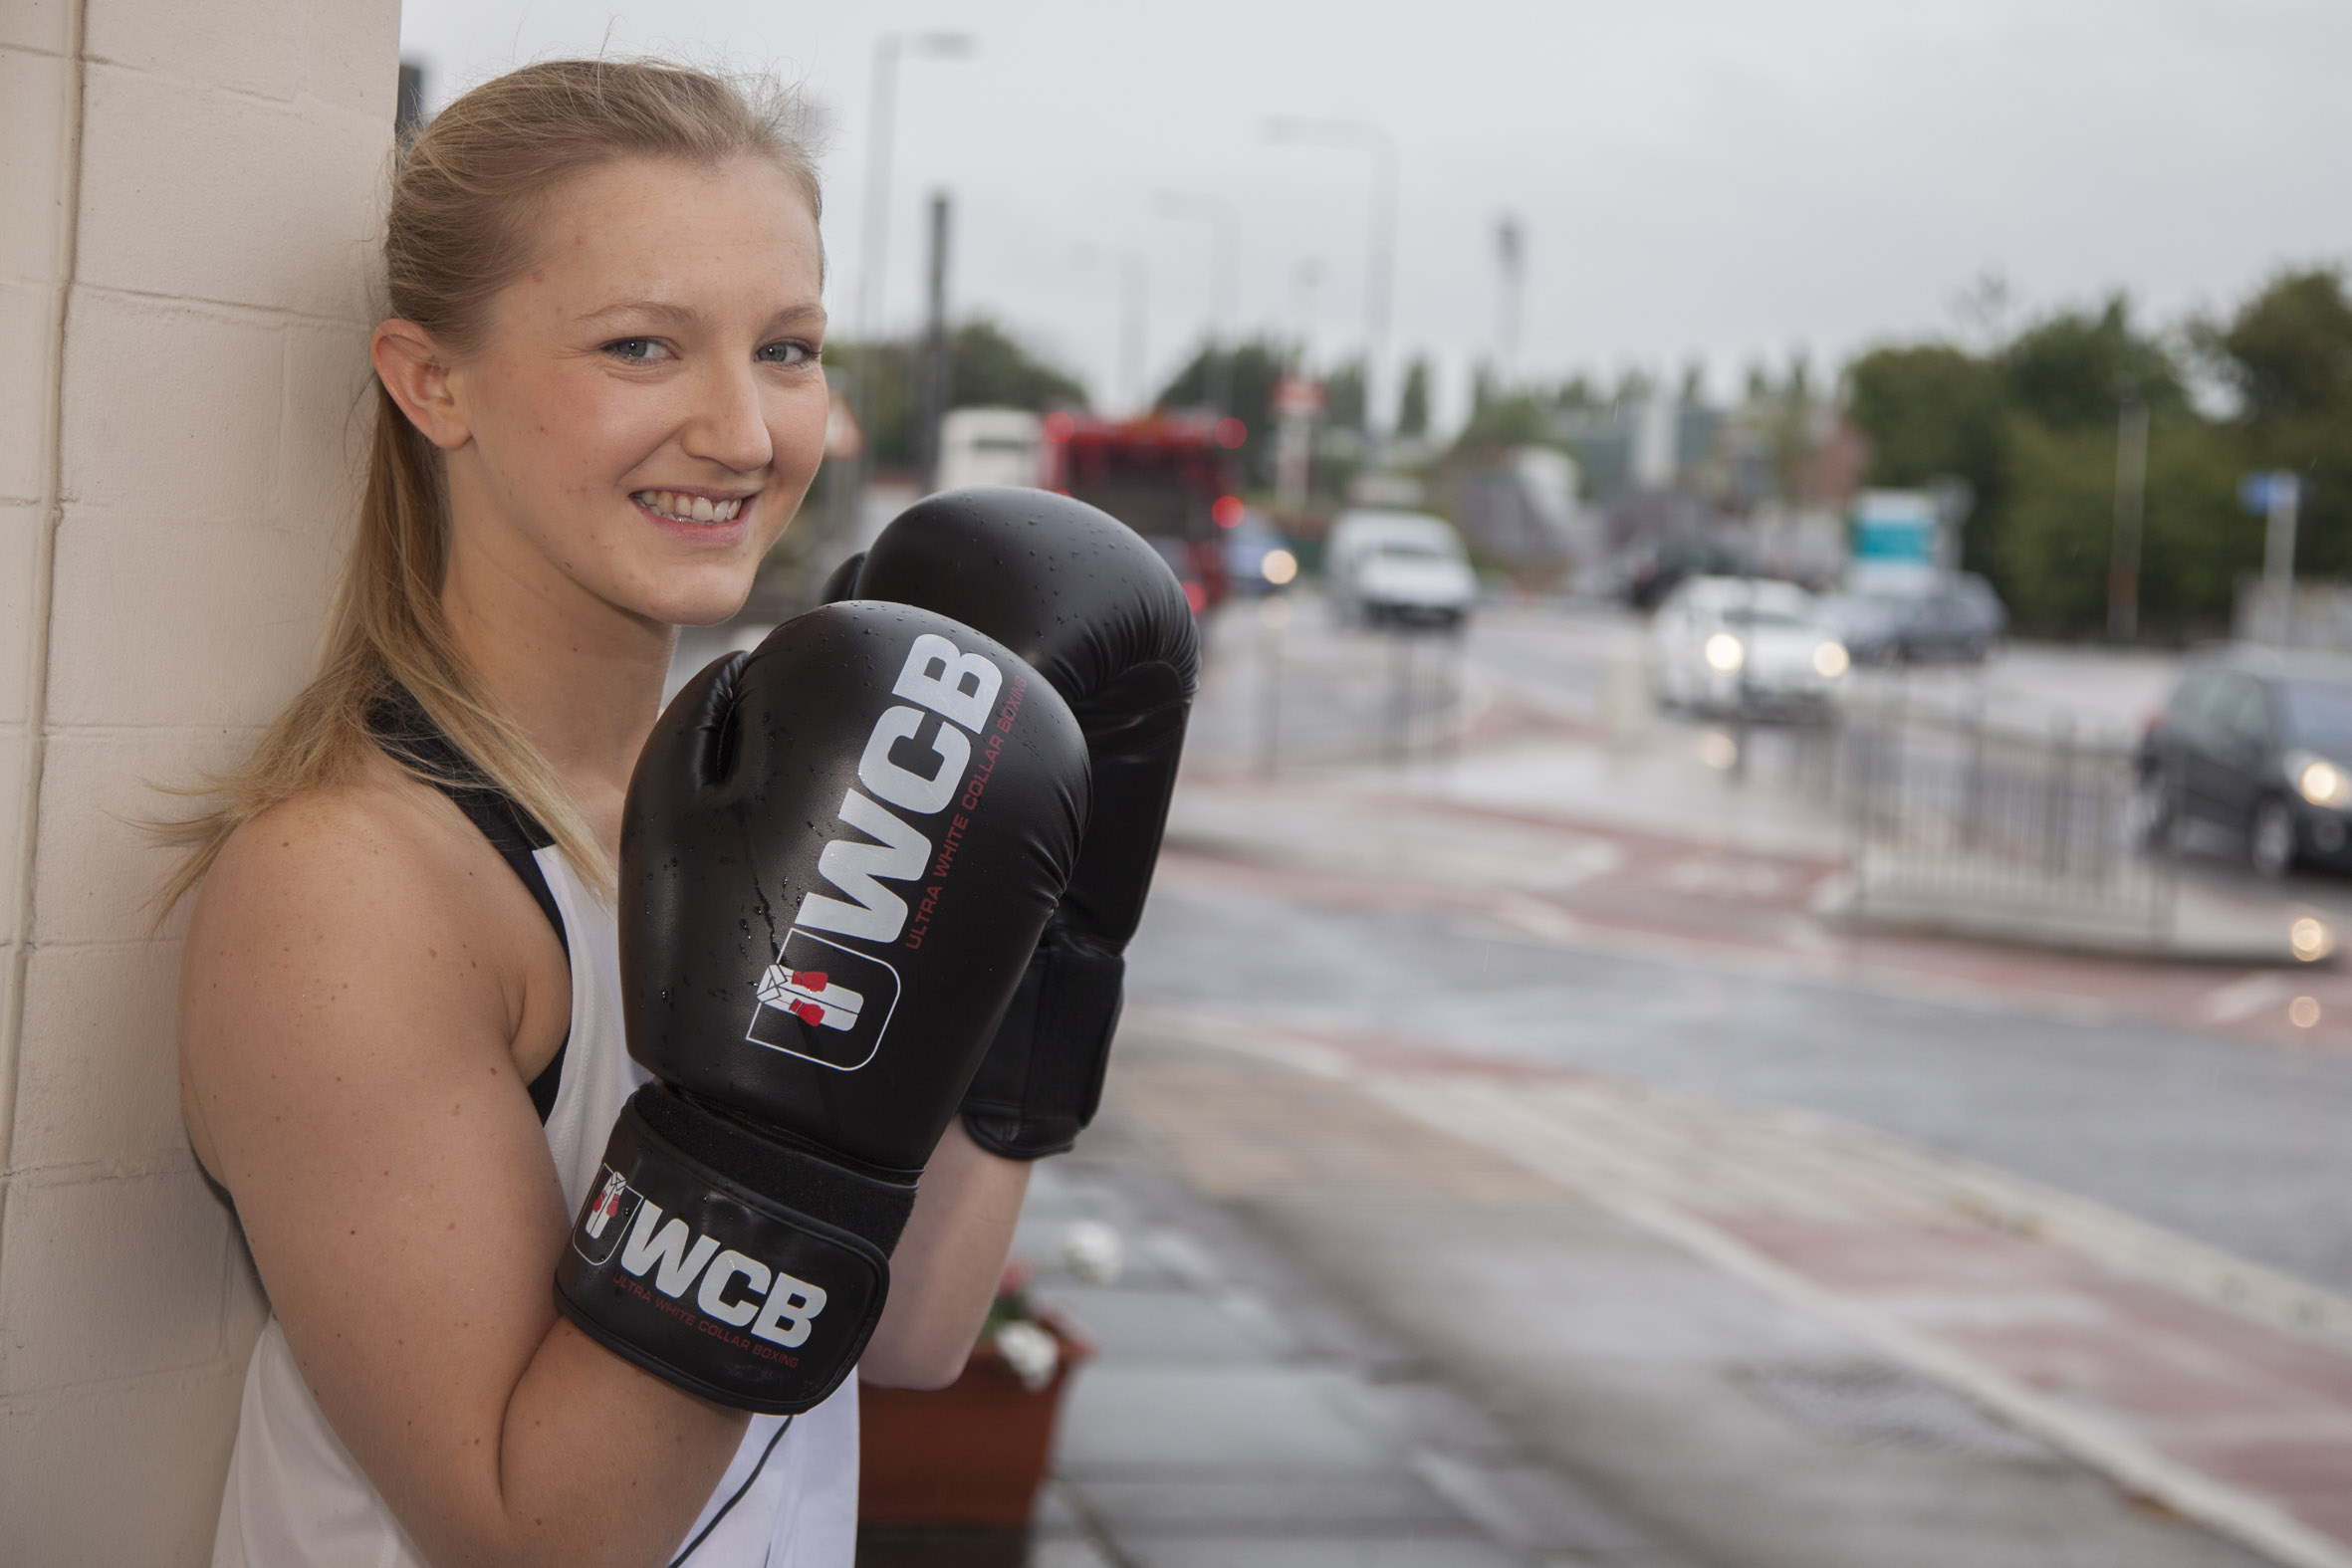 Steph fights back with personal boxing challenge for cancer charity